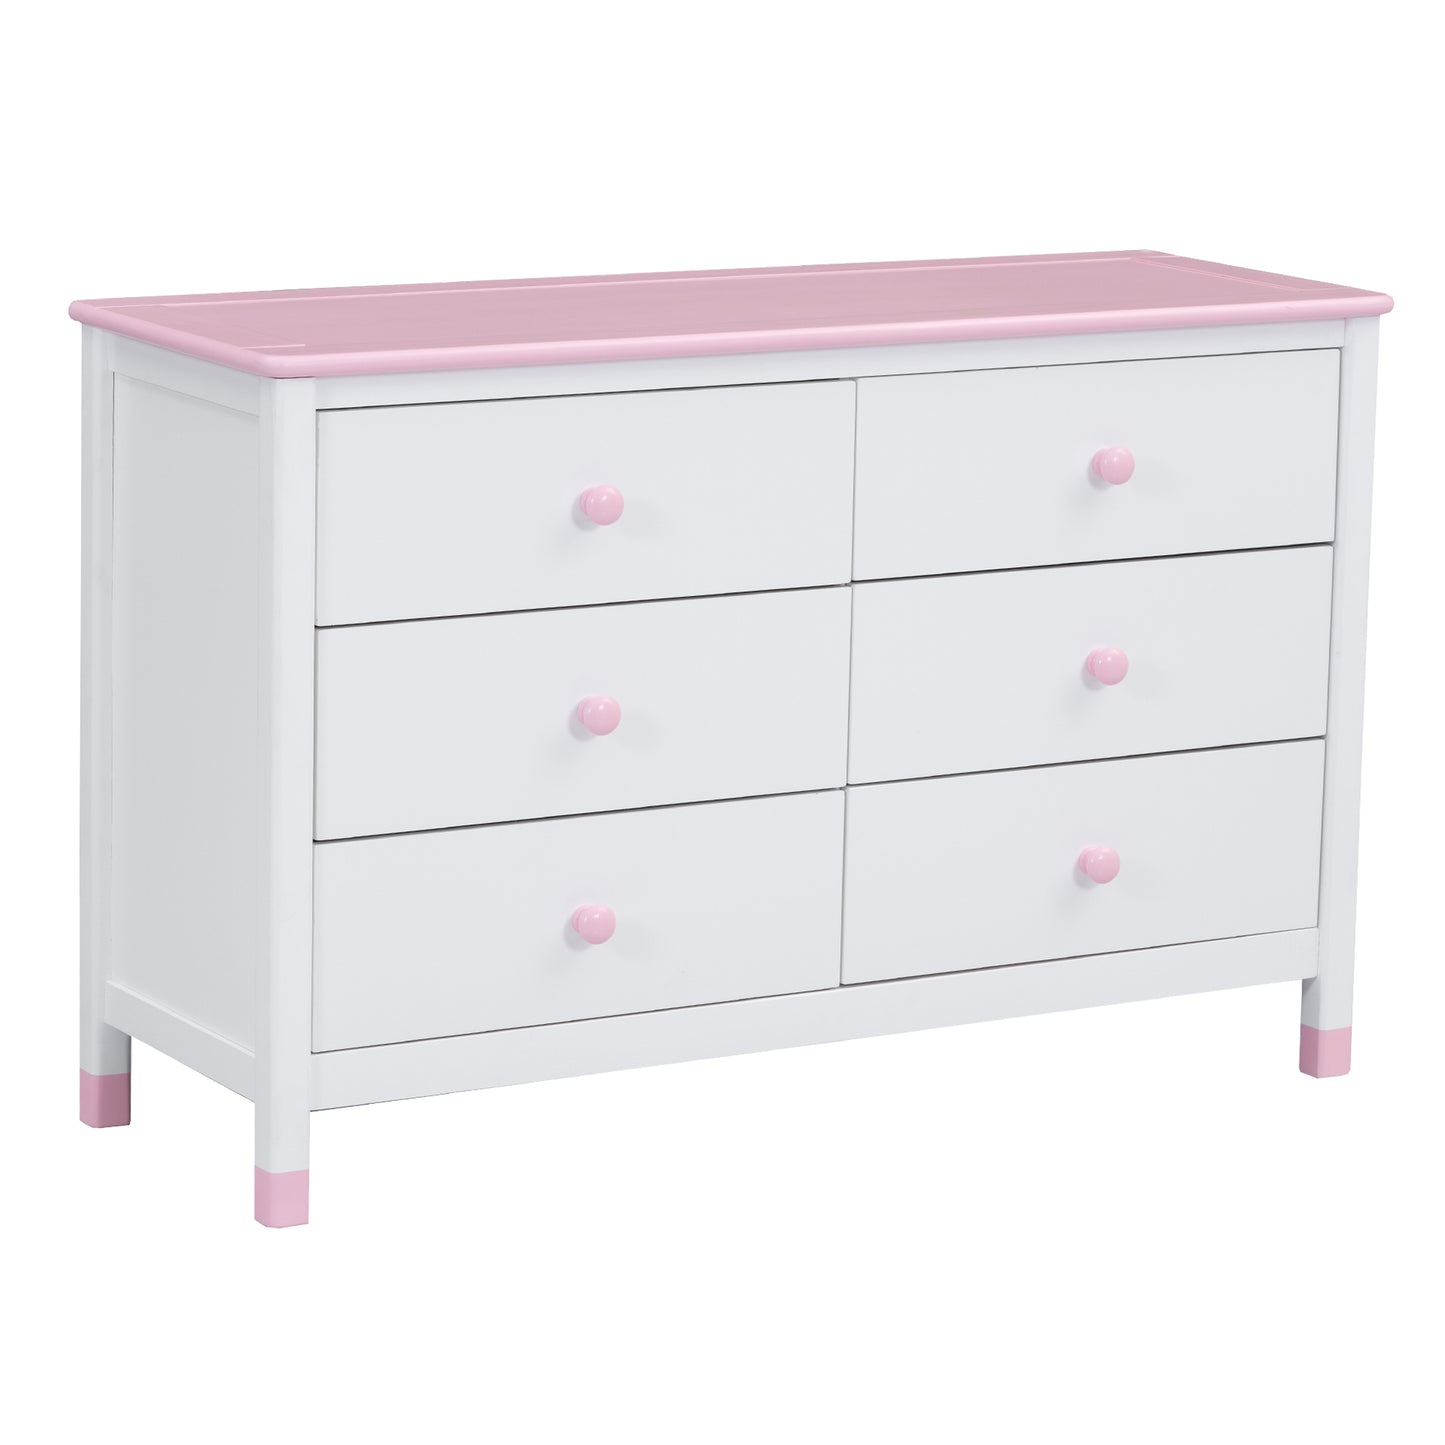 3-Pieces Bedroom Sets Full Size Platform Bed with Nightstand and Storage dresser,White+Pink